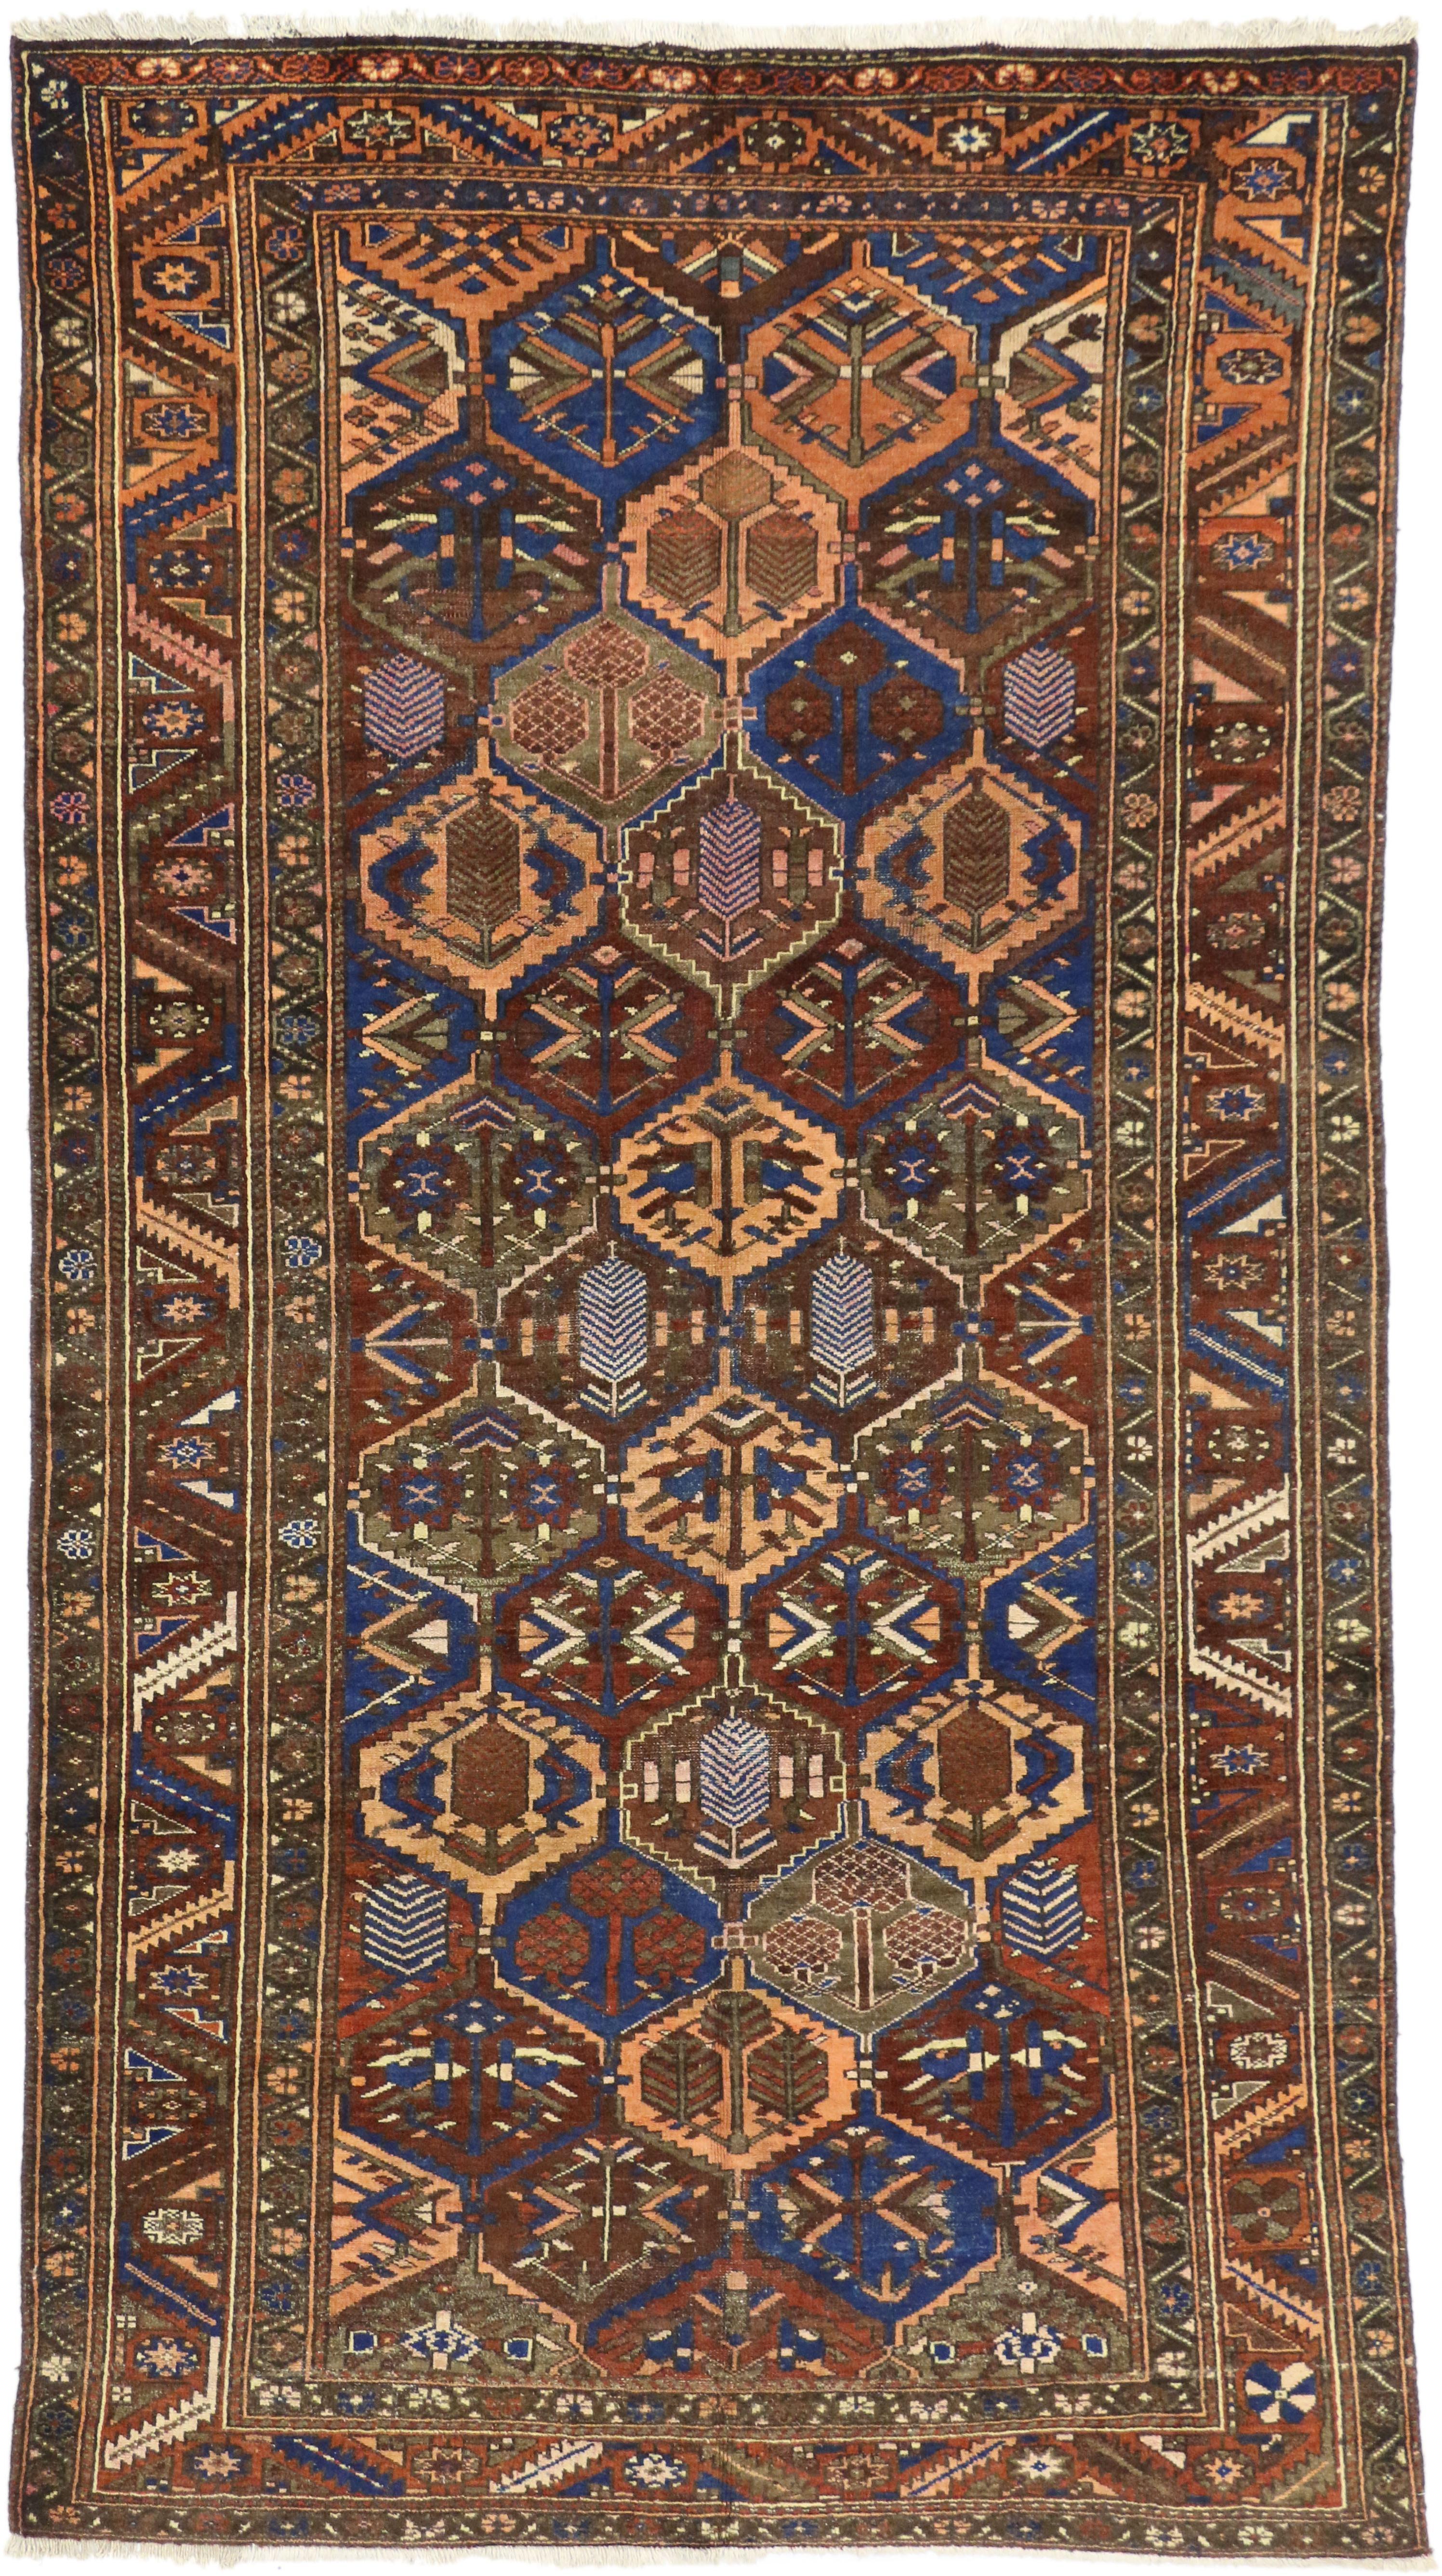 75269 Antique Persian Bakhtiari Rug, 05’08 x 10’03.
Biophilic Design meets beguiling elegance in this antique Persian Bakhtiari rug. The four seasons garden design and rich earthy hues woven into this piece work together cultivating a look of